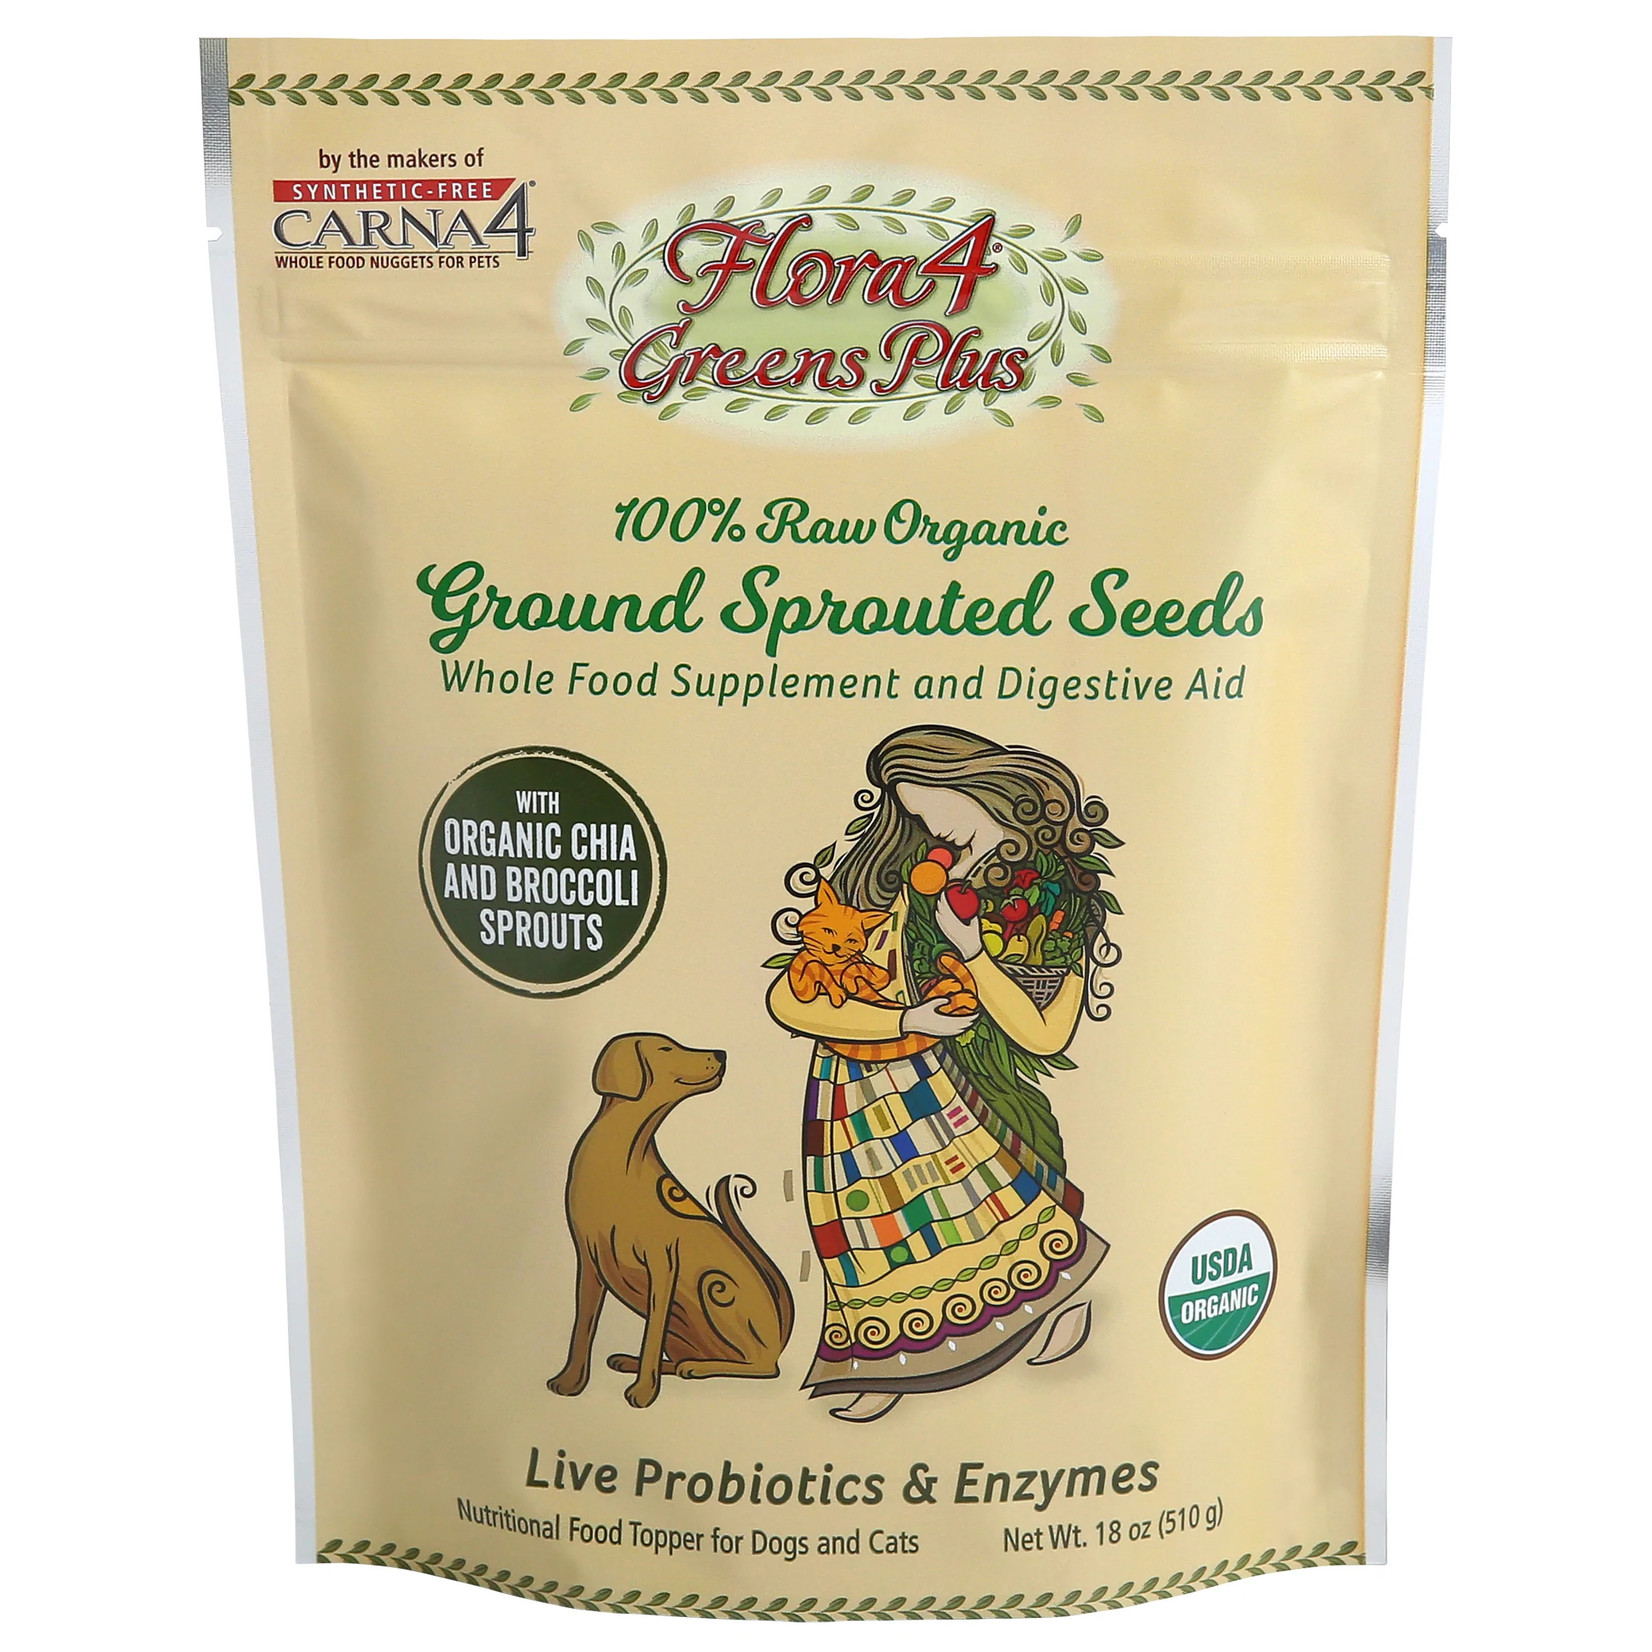 Carna4 Hand Crafted Pet Food Carna4 Flora4 Greens Plus Ground Sprouted Seeds Nutritional Supplement